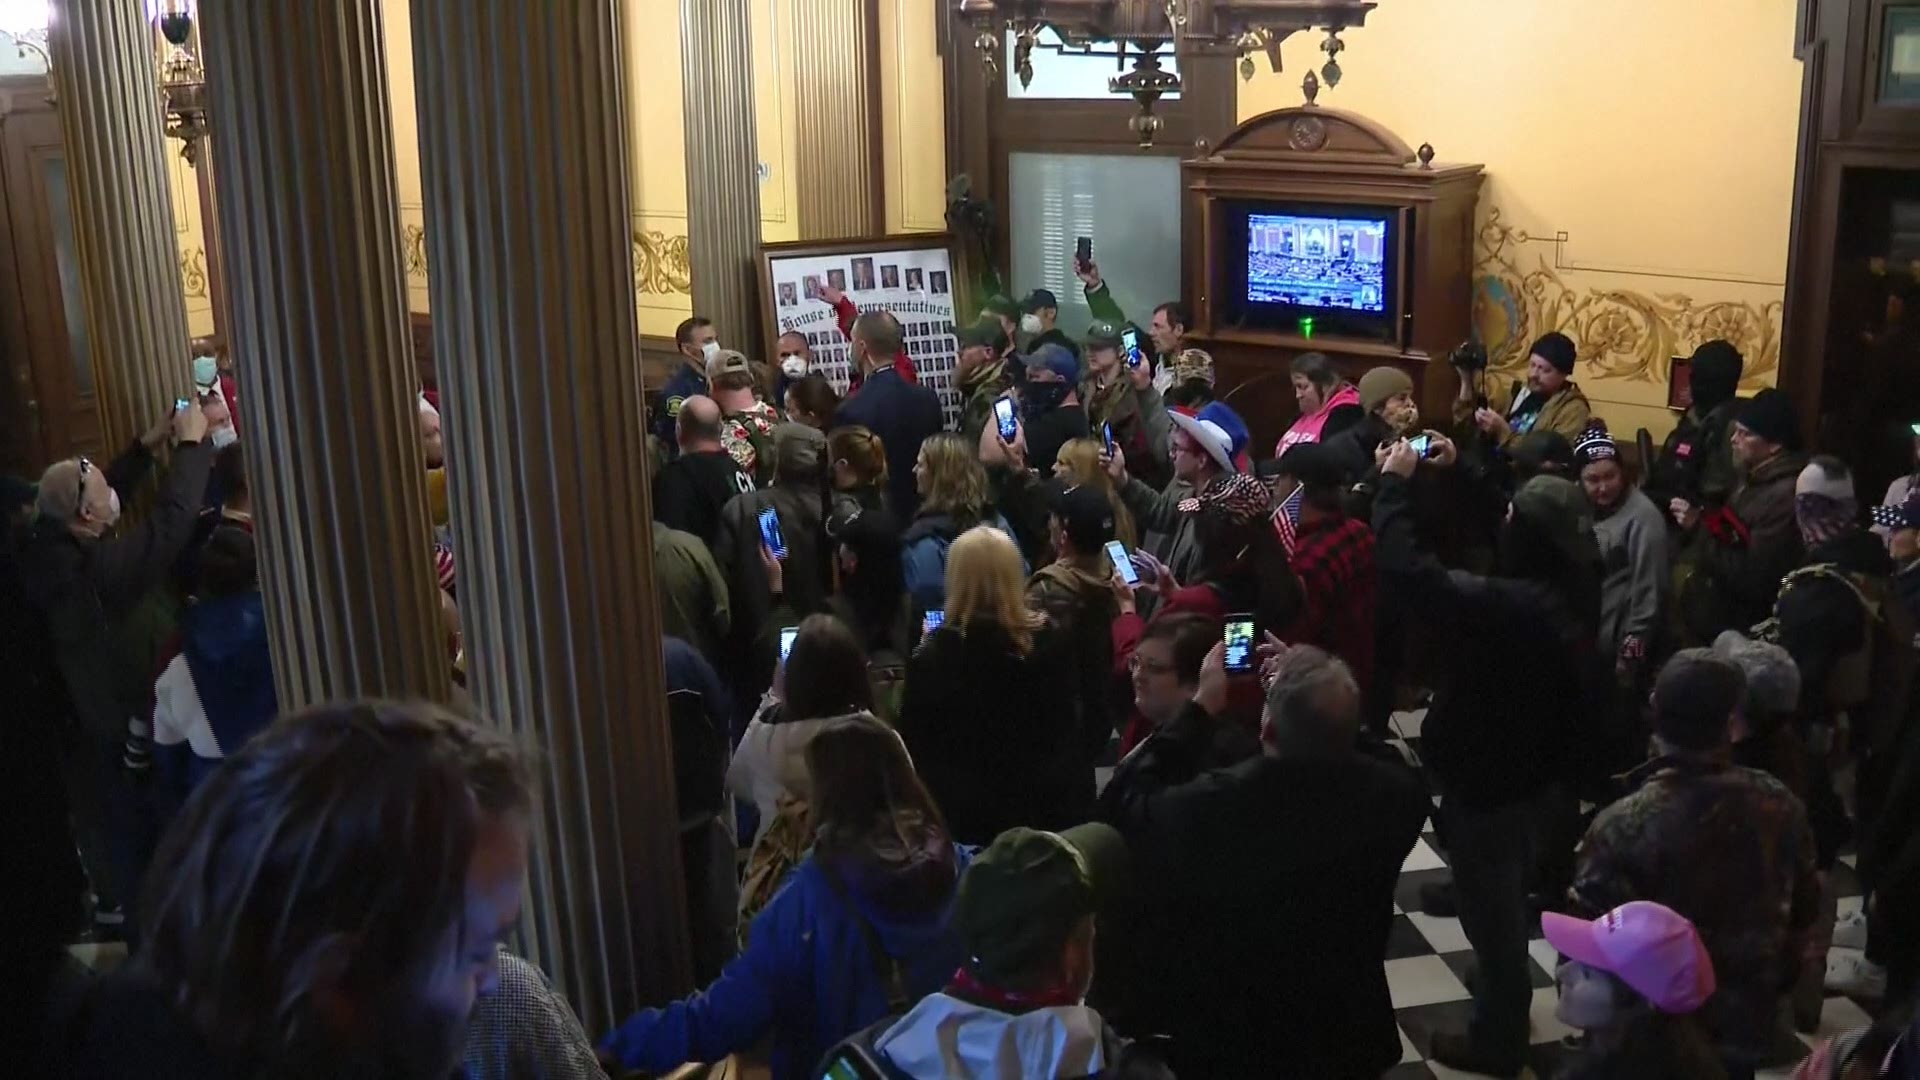 Demonstrators pushed their way into the Michigan State Capitol building in Lansing on Thursday as lawmakers were voting on extending a state of emergency.